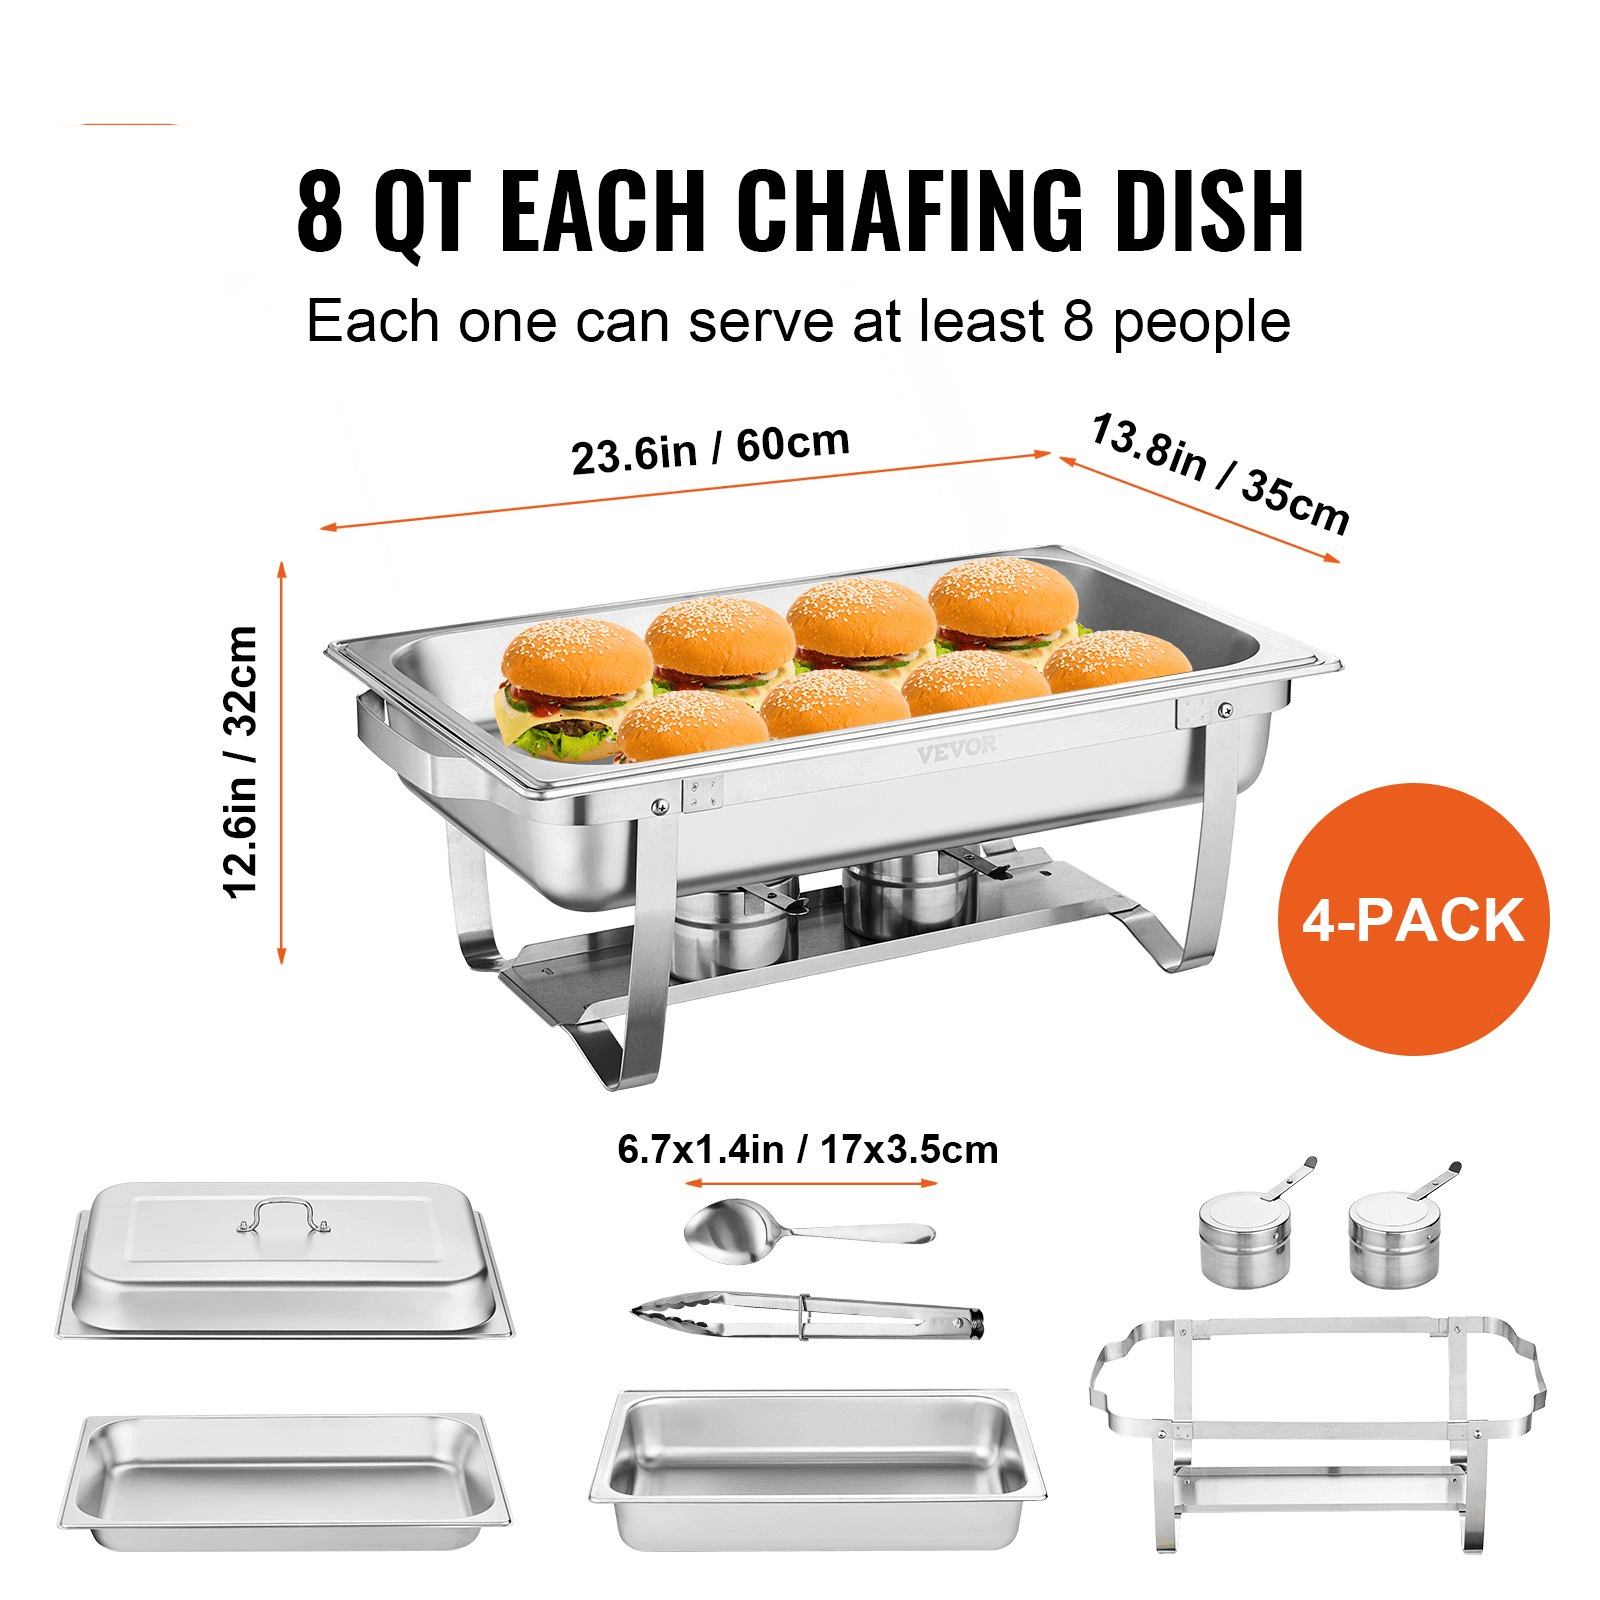 4 pack chafing dish set